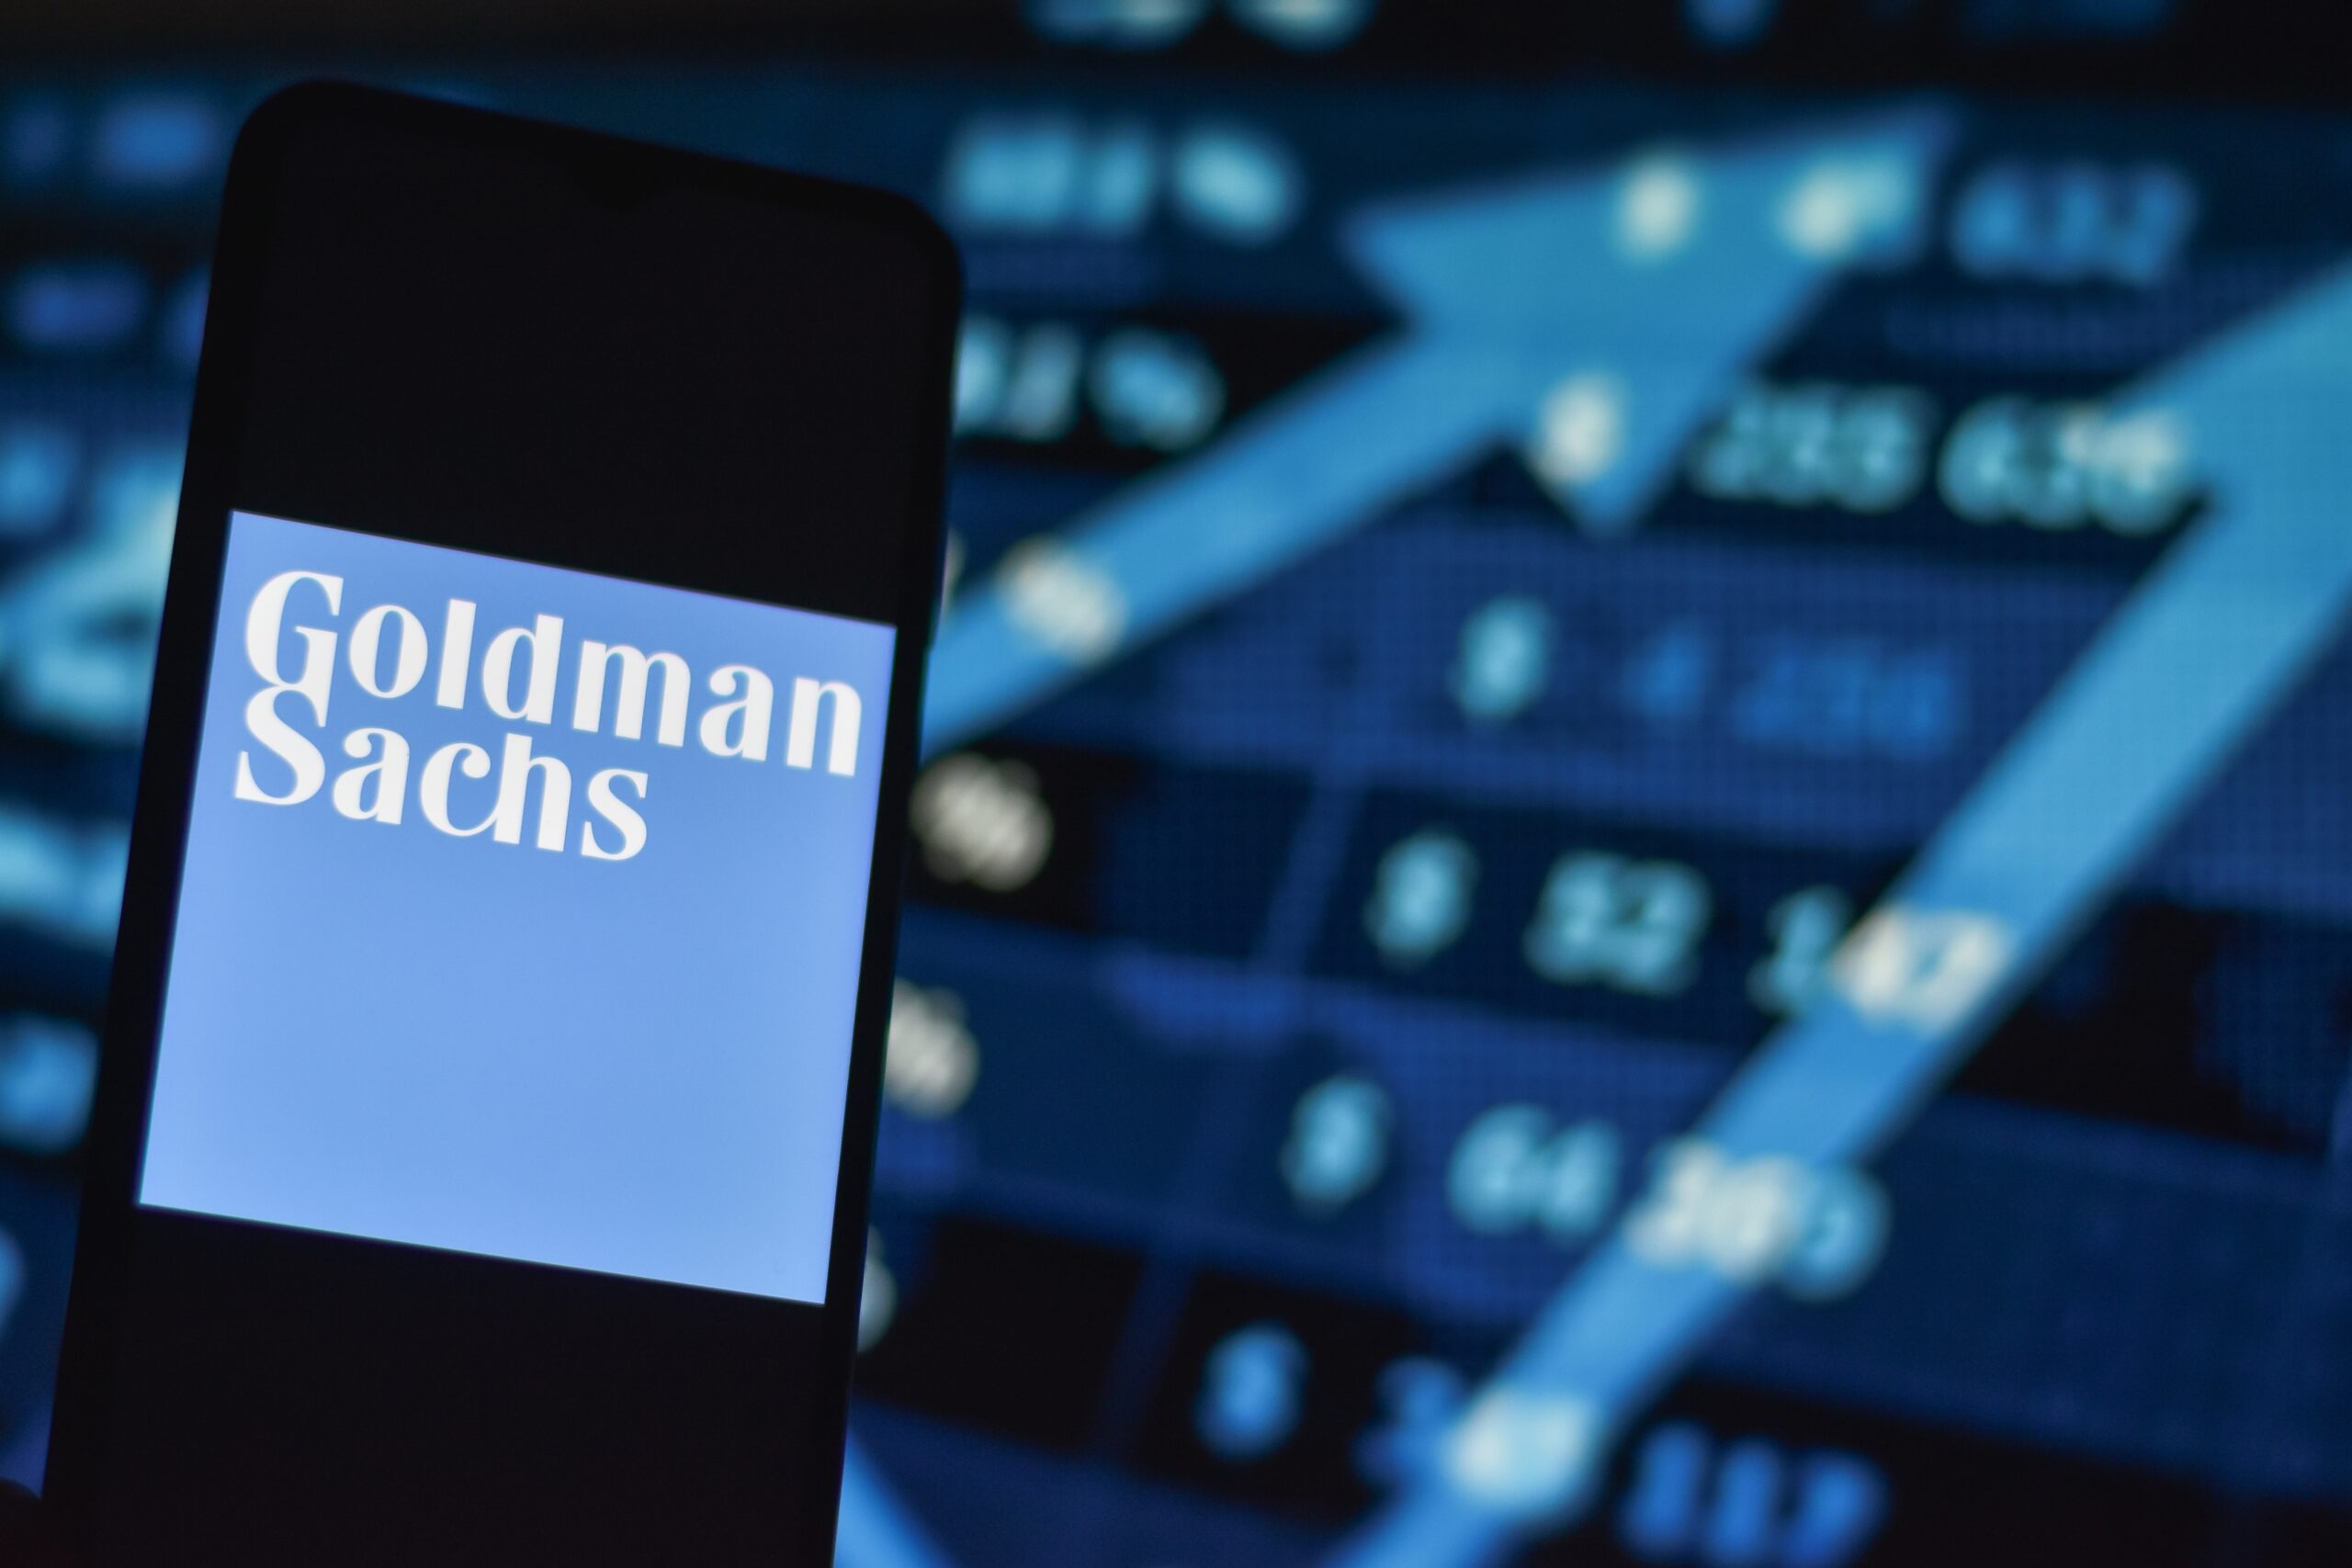 Goldman Sachs Explores Emerging Markets for AI Investment Opportunities